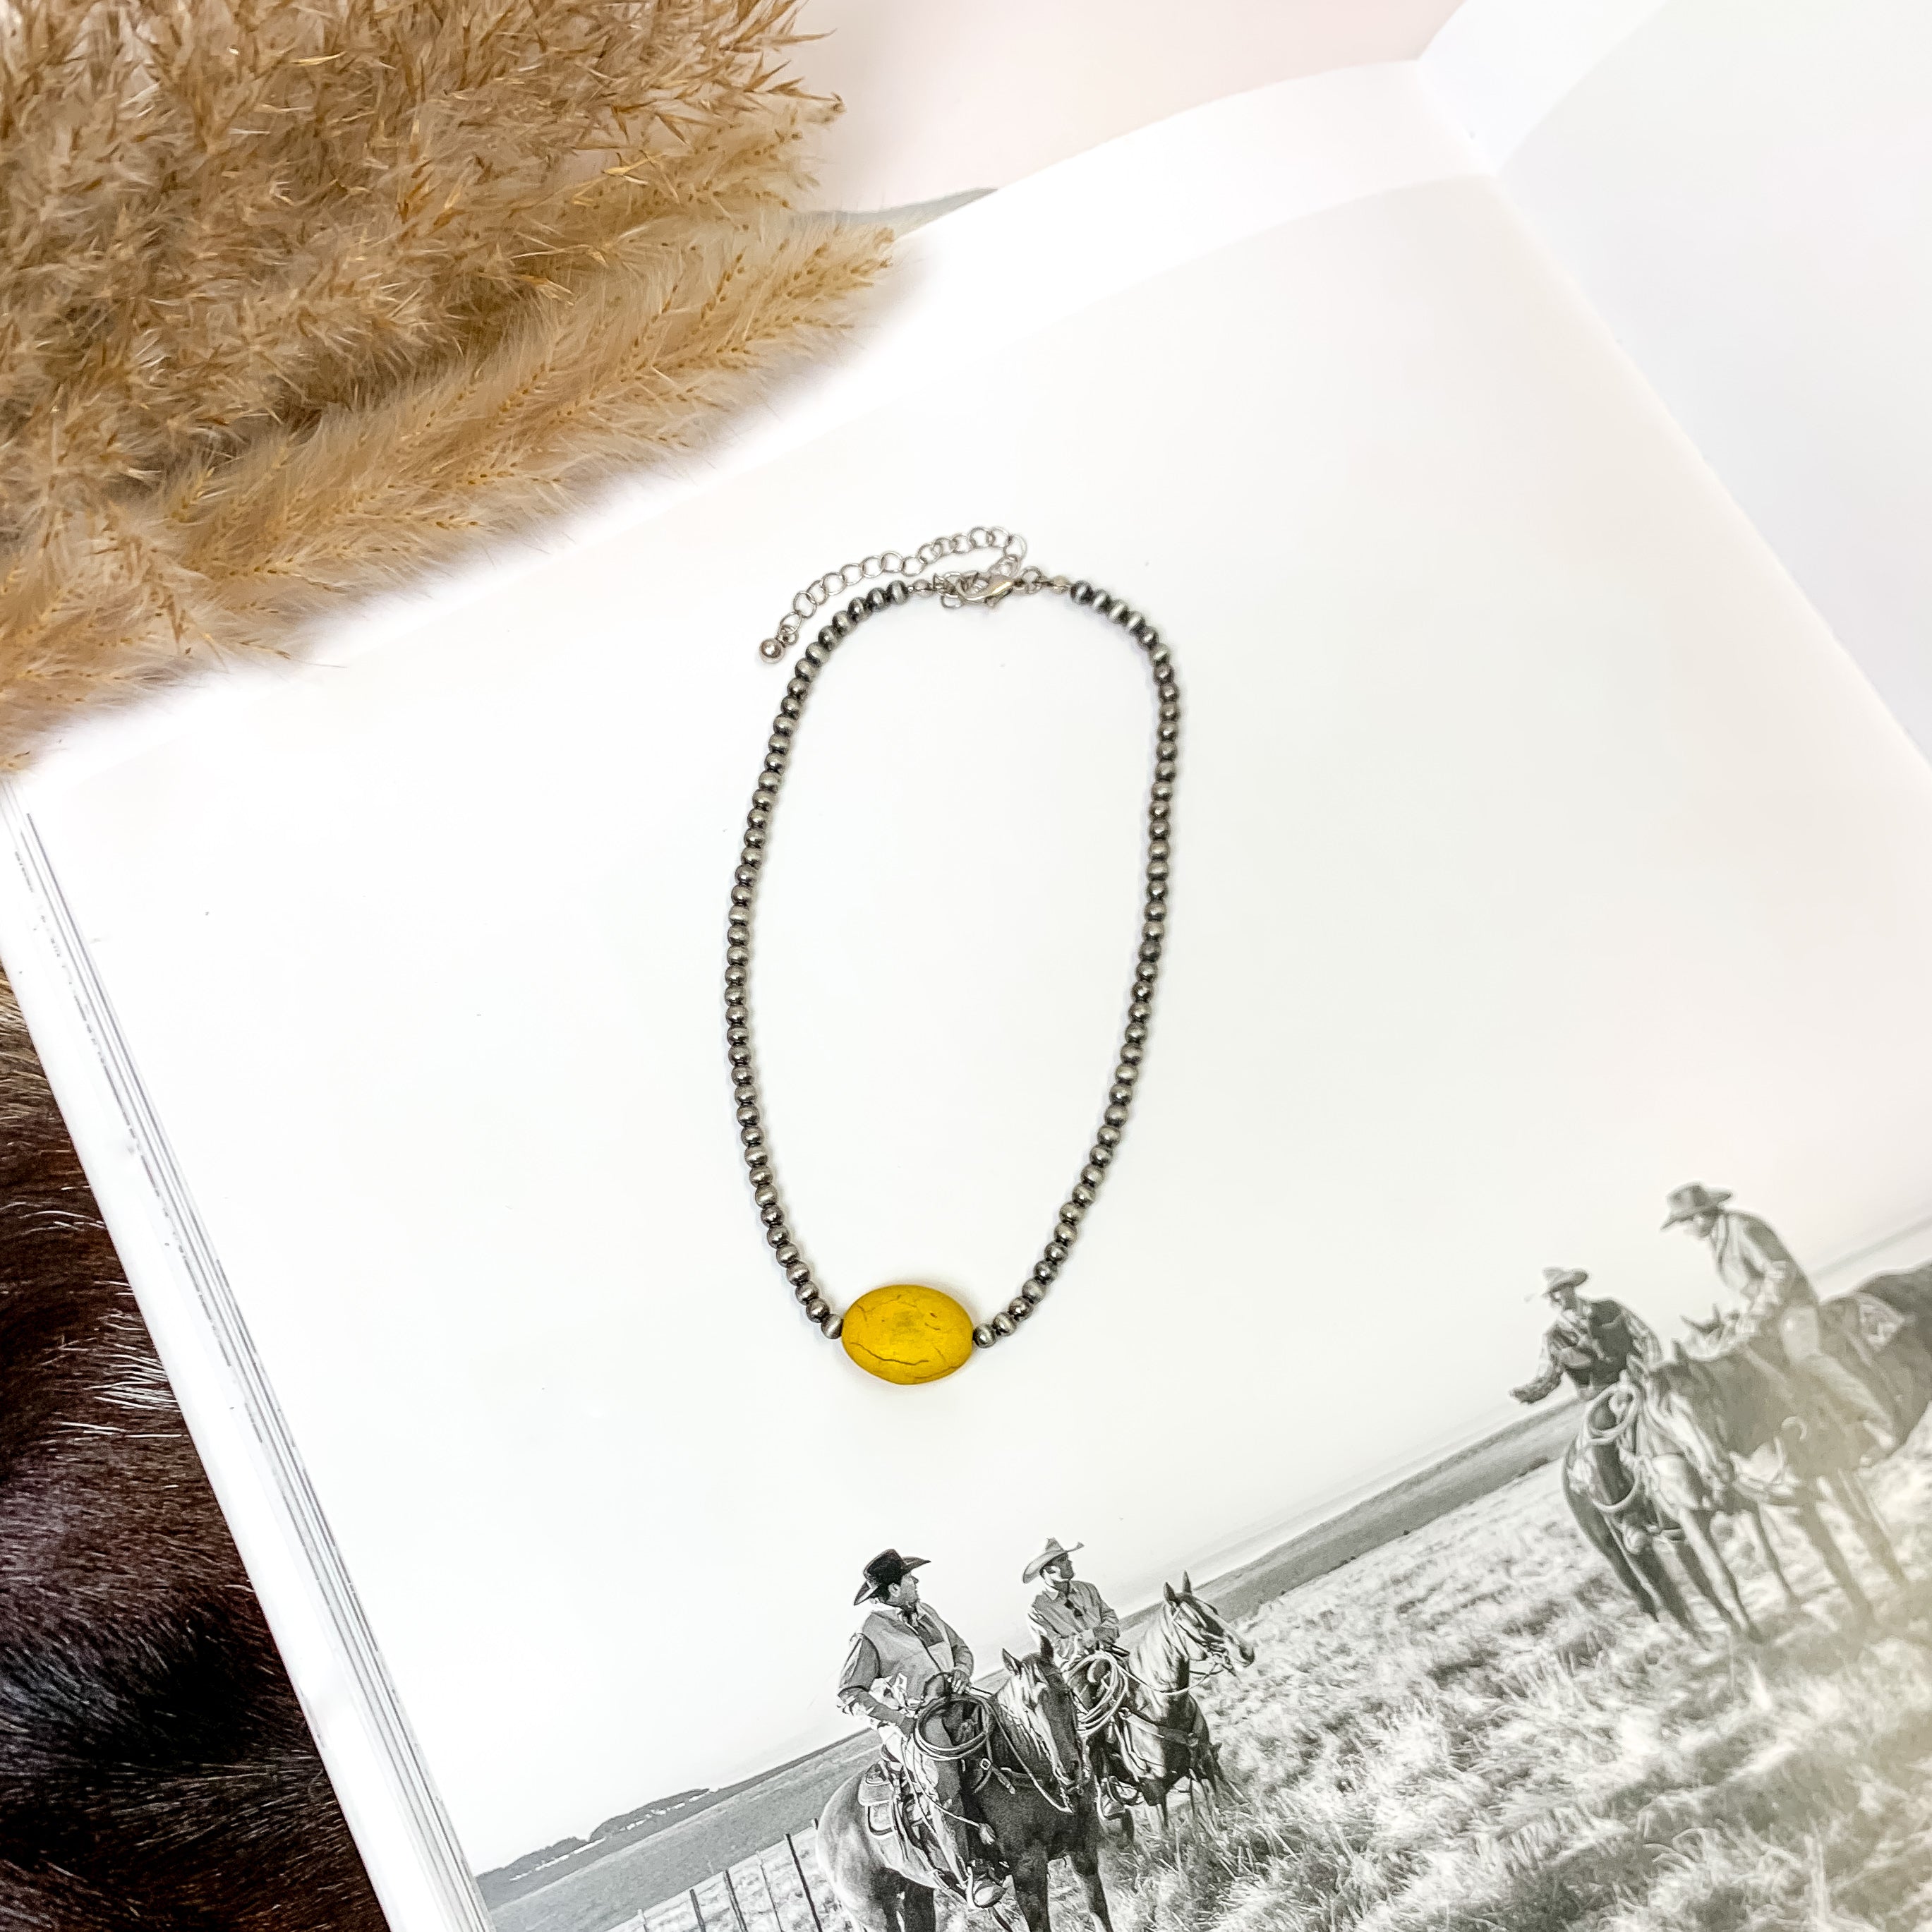 Small Faux Navajo Pearls Choker Necklace in Silver Tone with Mustard Yellow Oval Stone